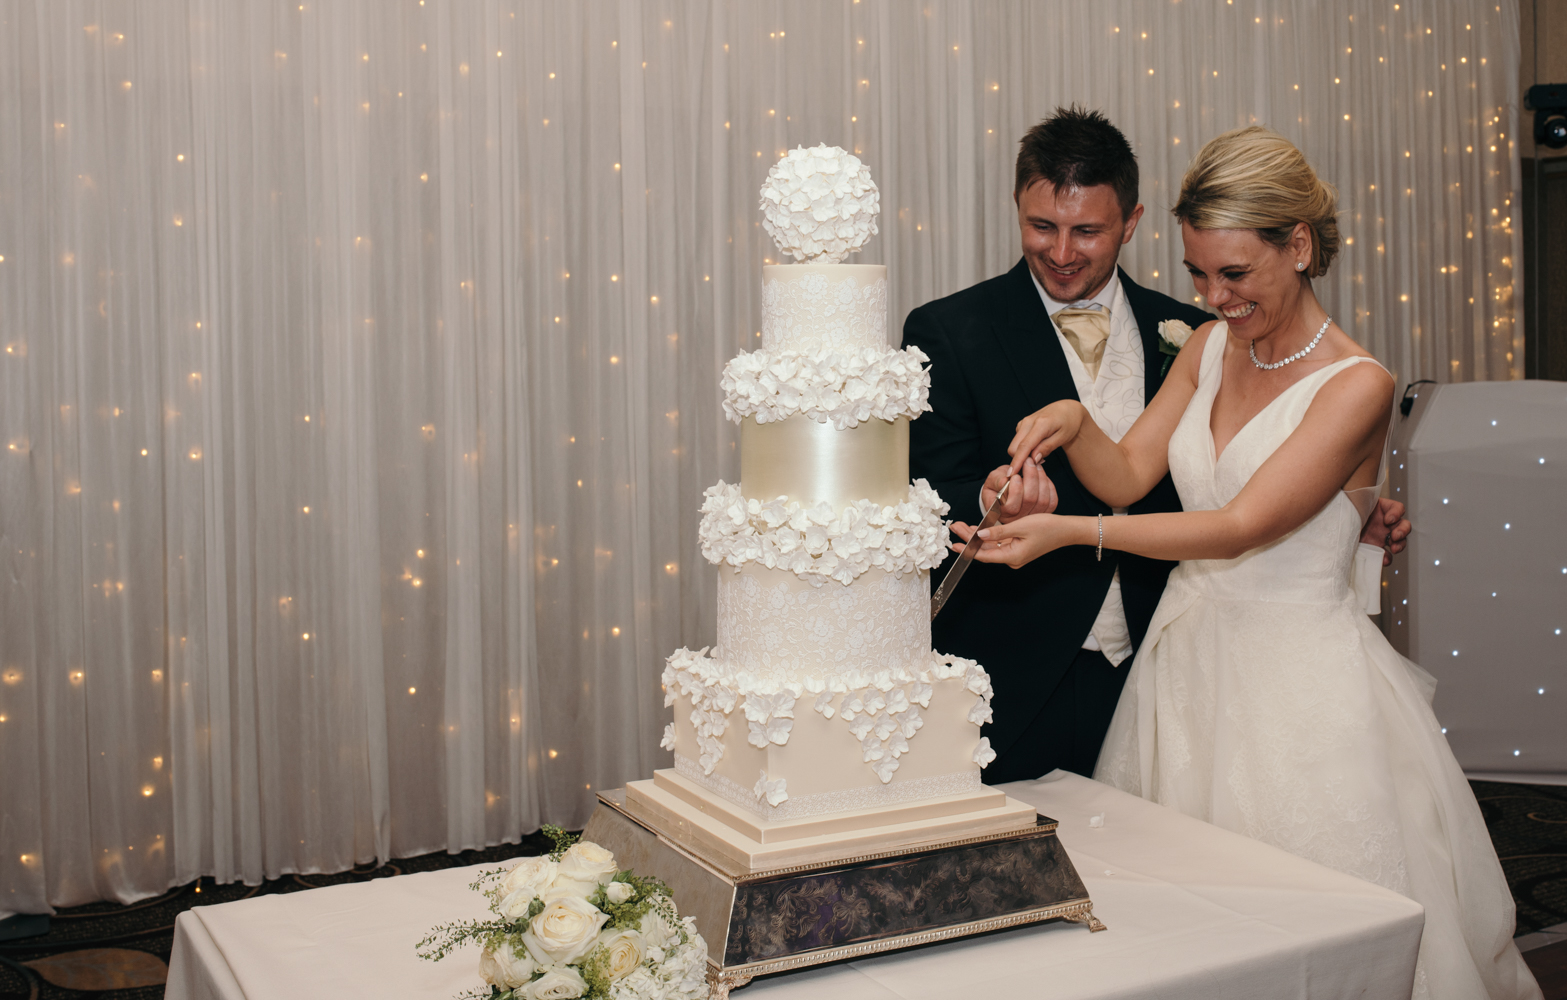 The bride and groom giggling whilst cutting the wedding cake